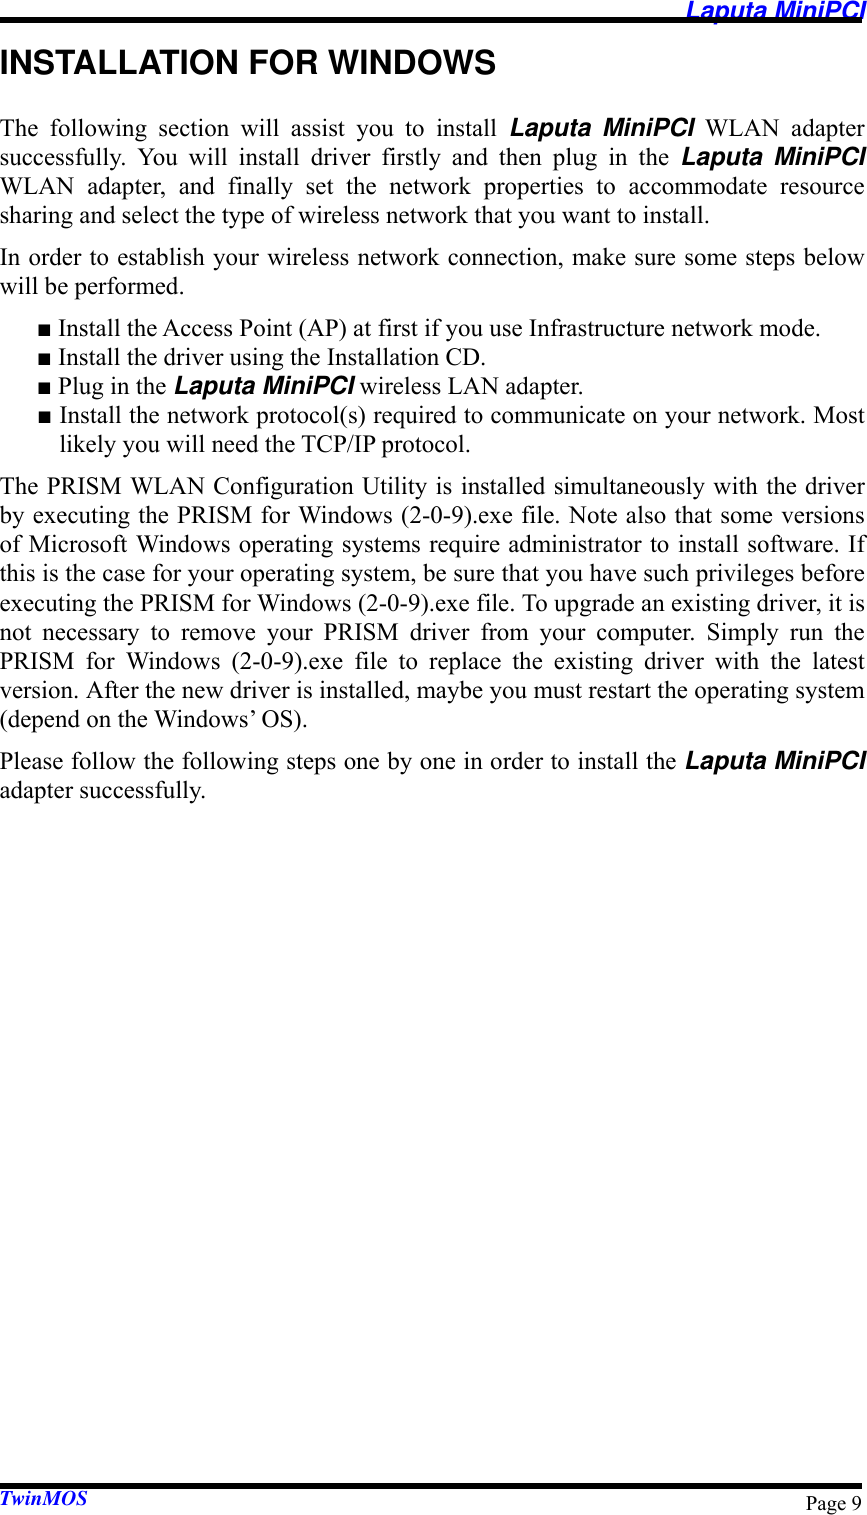   Laputa MiniPCI TwinMOS  Page 9INSTALLATION FOR WINDOWS The following section will assist you to install Laputa MiniPCI WLAN adapter successfully. You will install driver firstly and then plug in the Laputa MiniPCI WLAN adapter, and finally set the network properties to accommodate resource sharing and select the type of wireless network that you want to install. In order to establish your wireless network connection, make sure some steps below will be performed. ■ Install the Access Point (AP) at first if you use Infrastructure network mode. ■ Install the driver using the Installation CD. ■ Plug in the Laputa MiniPCI wireless LAN adapter. ■ Install the network protocol(s) required to communicate on your network. Most likely you will need the TCP/IP protocol. The PRISM WLAN Configuration Utility is installed simultaneously with the driver by executing the PRISM for Windows (2-0-9).exe file. Note also that some versions of Microsoft Windows operating systems require administrator to install software. If this is the case for your operating system, be sure that you have such privileges before executing the PRISM for Windows (2-0-9).exe file. To upgrade an existing driver, it is not necessary to remove your PRISM driver from your computer. Simply run the PRISM for Windows (2-0-9).exe file to replace the existing driver with the latest version. After the new driver is installed, maybe you must restart the operating system (depend on the Windows’ OS). Please follow the following steps one by one in order to install the Laputa MiniPCI adapter successfully. 